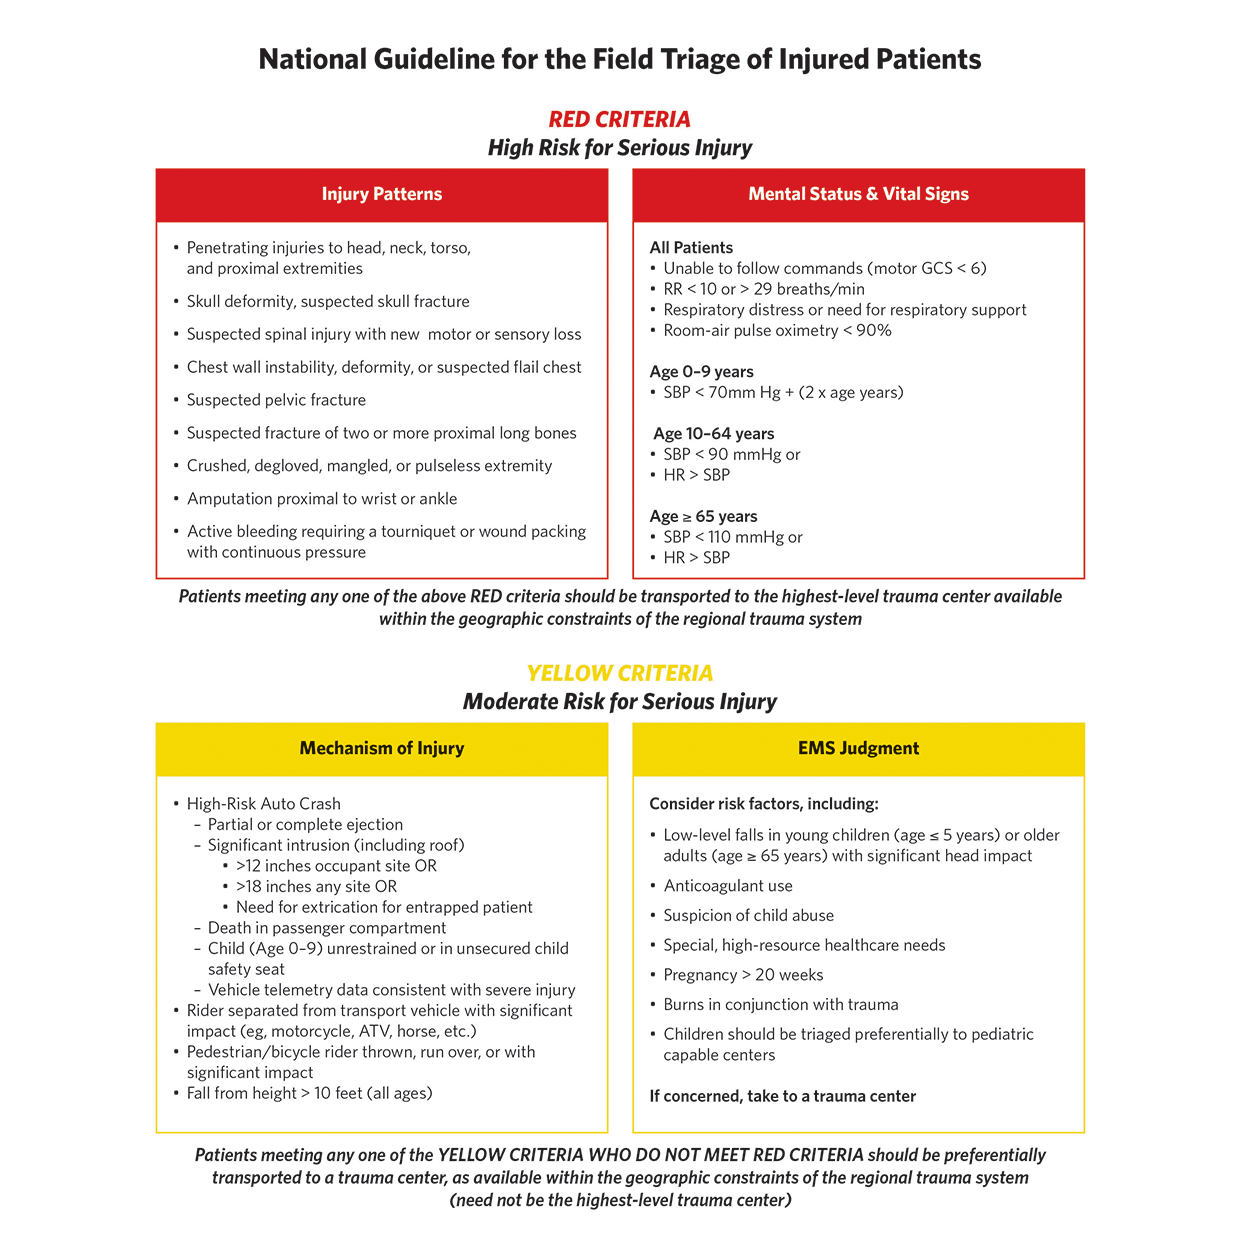 National Guidelines for the Field Triage of Injured Patients